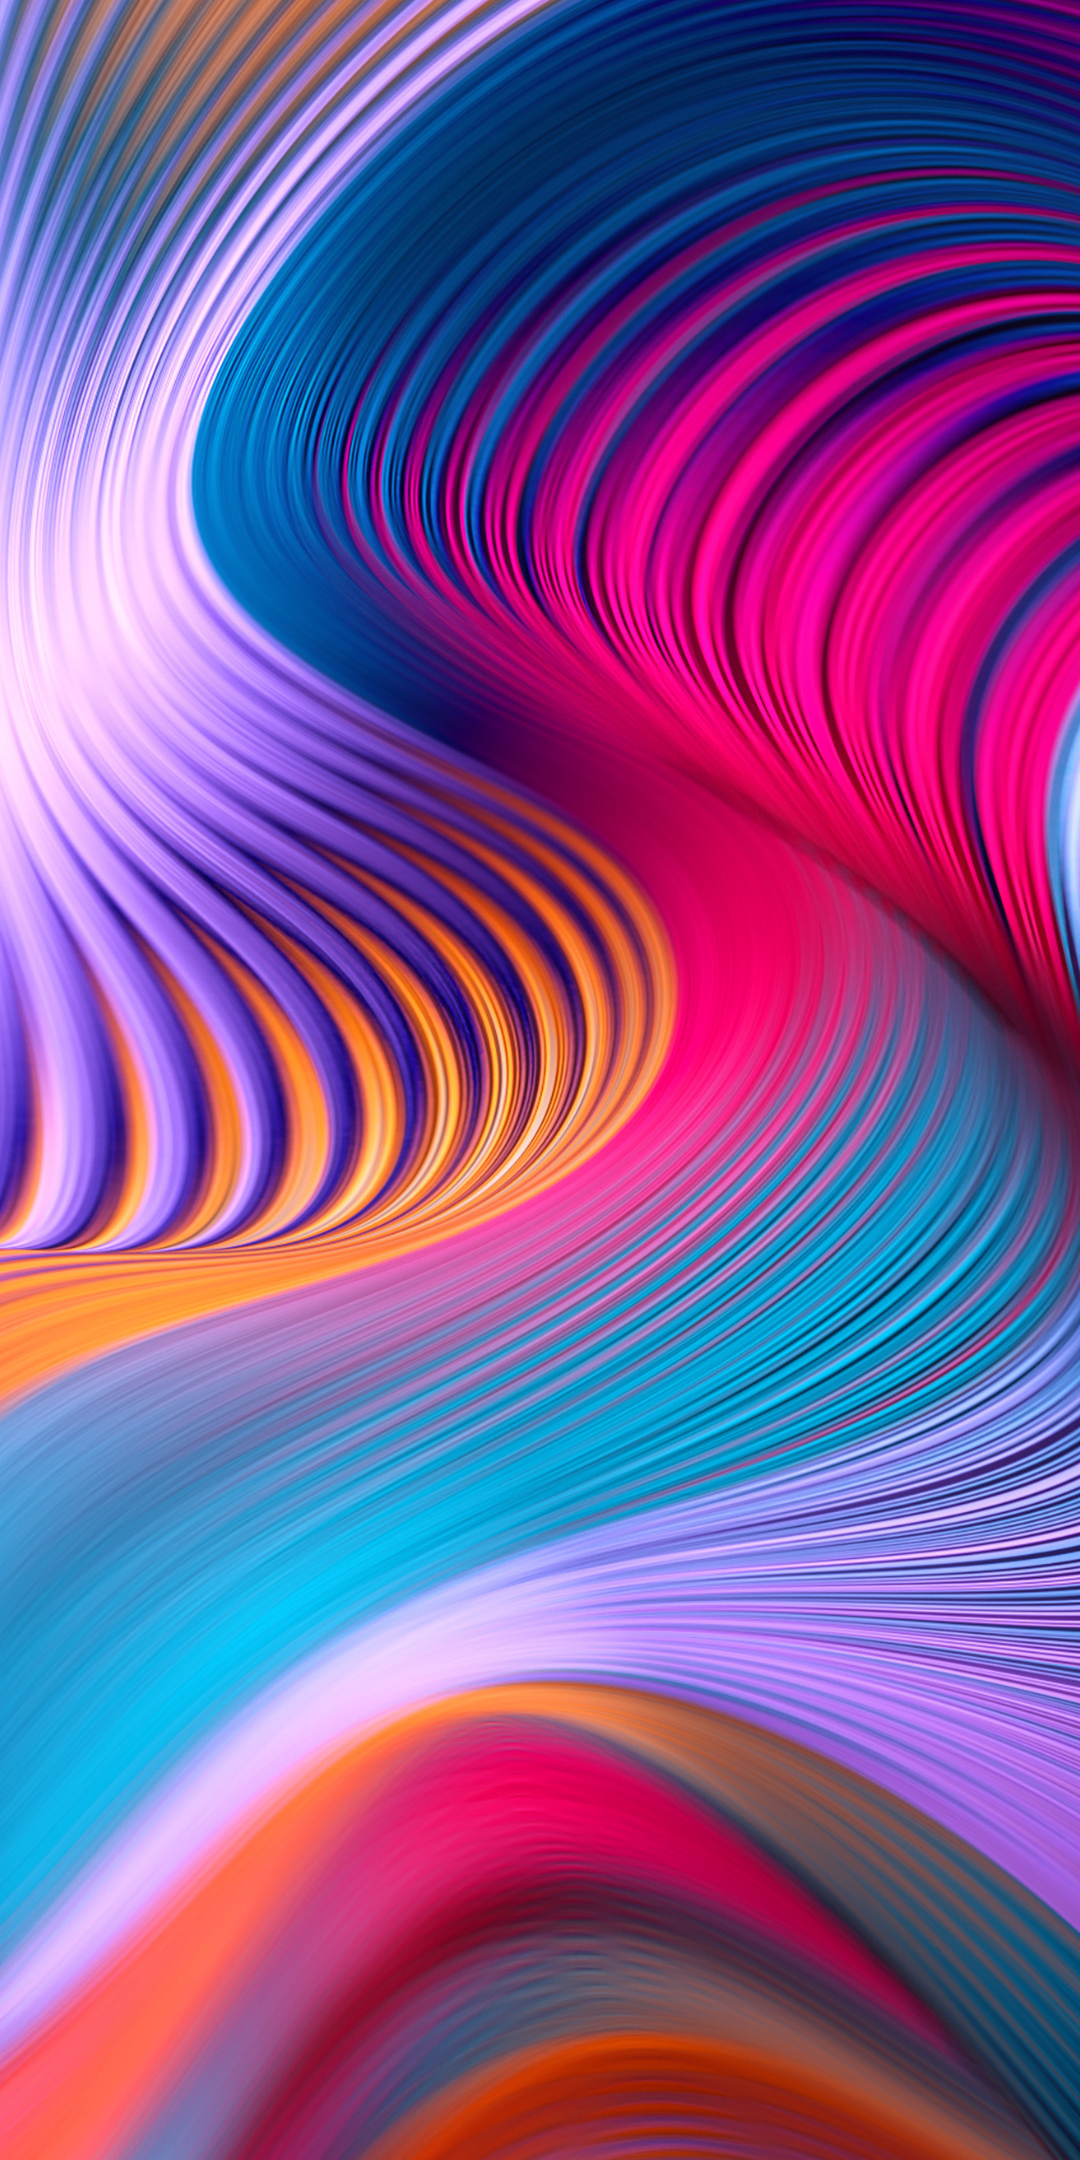 Wavy stripes, artwork, abstraction, colorful, 1080x2160 wallpaper